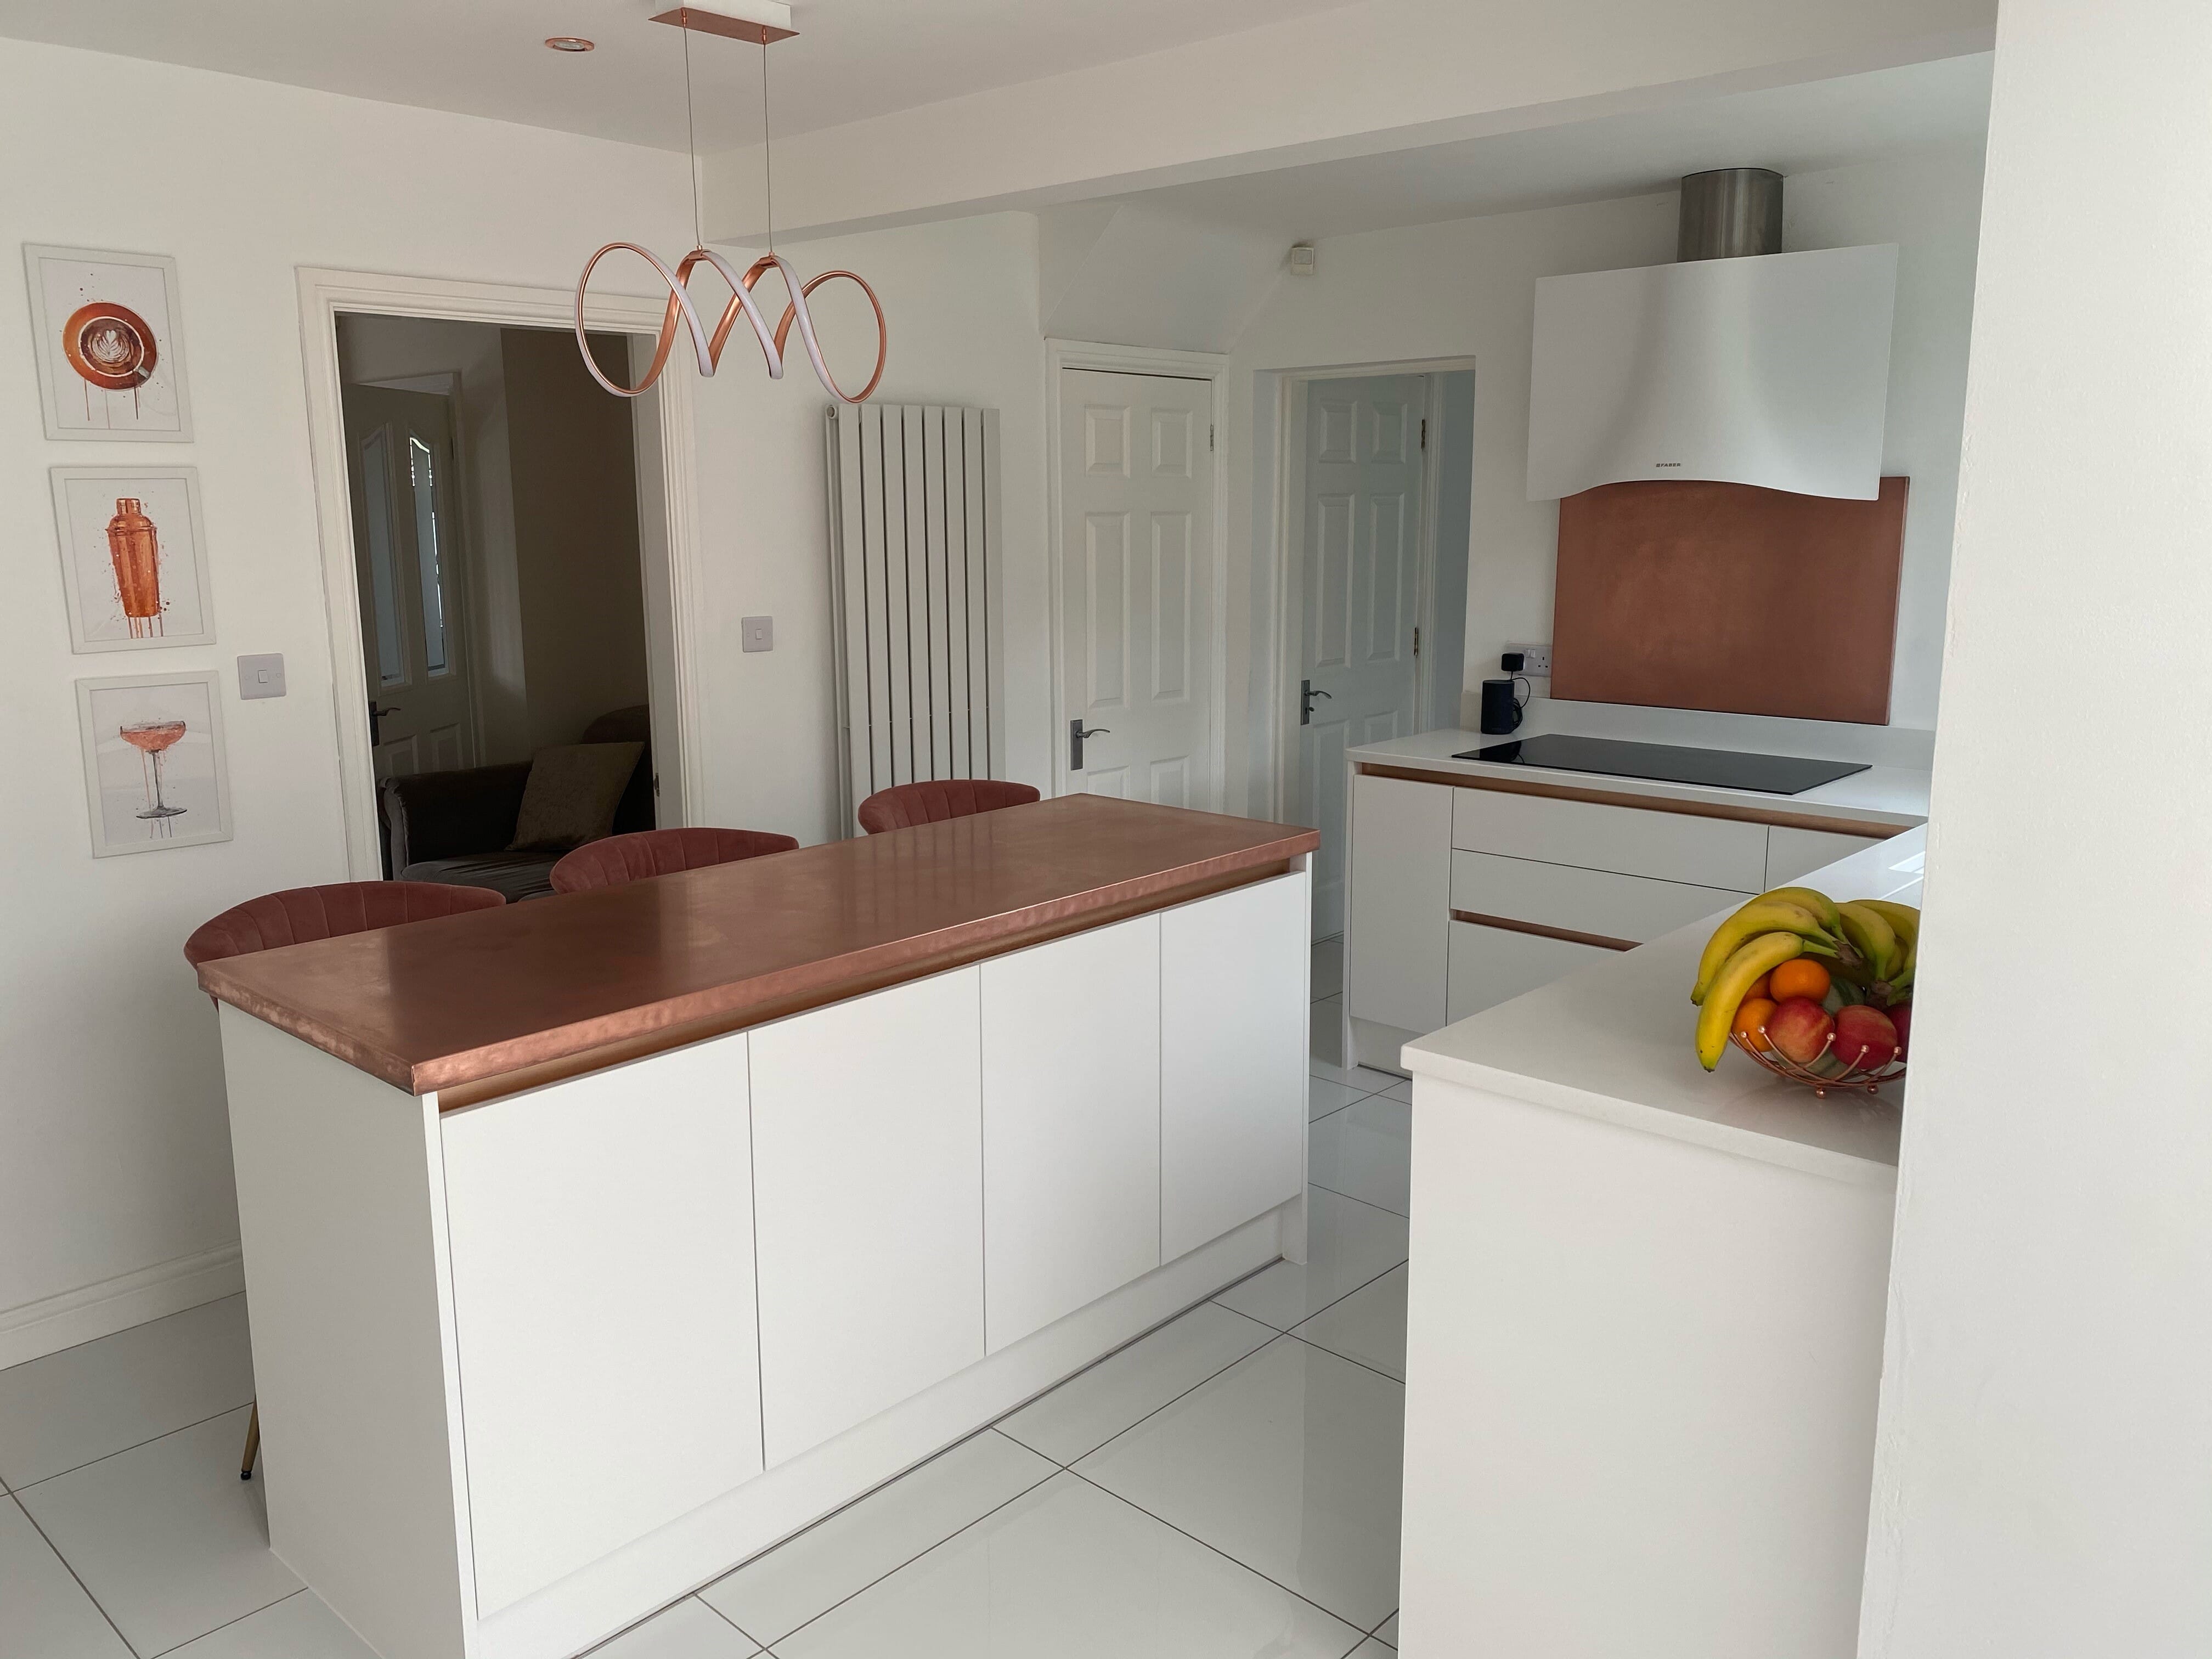 Copper Worktop For Your Kitchen Bar Or Pub For Sale at UKAA